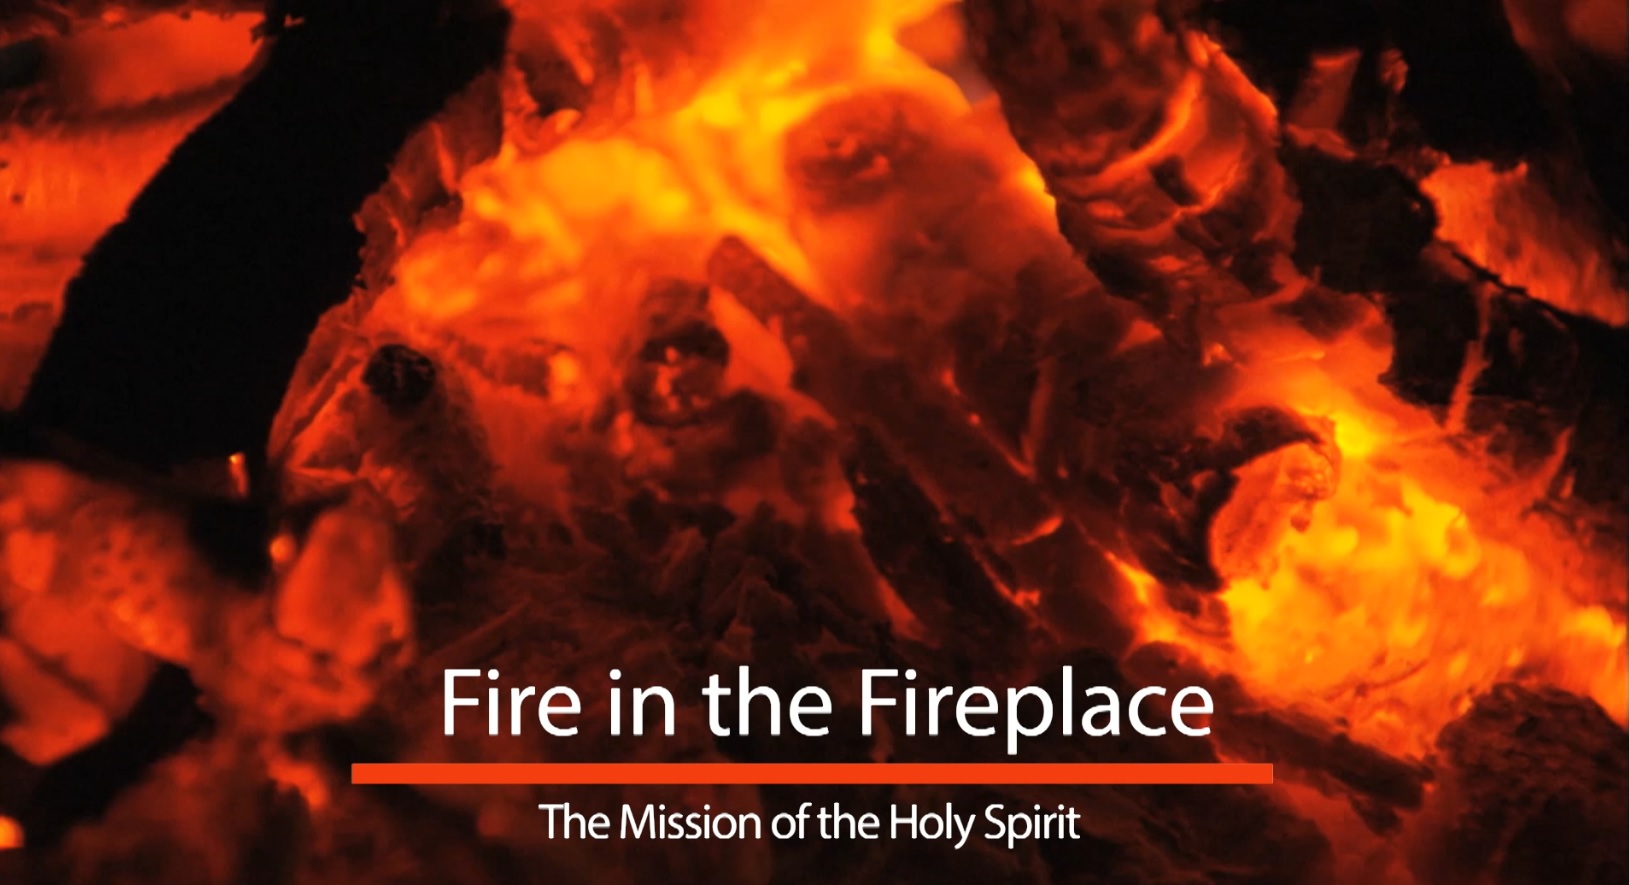 Fire in the Fireplace: The Mission of the Holy Spirit